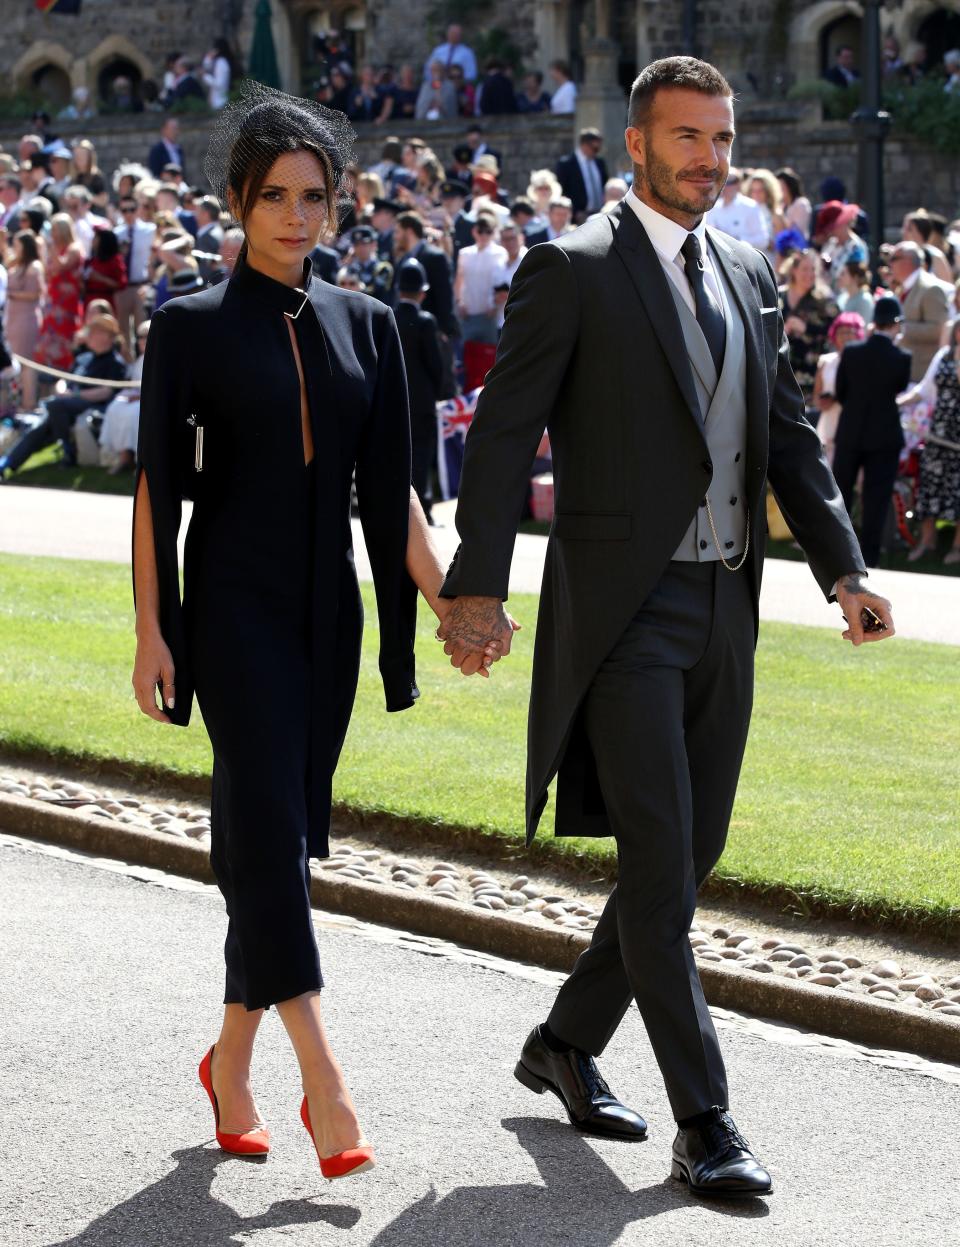 Victoria Beckham and David Beckham at Prince Harry and Meghan Markle's wedding on May 19, 2018 in Windsor, England